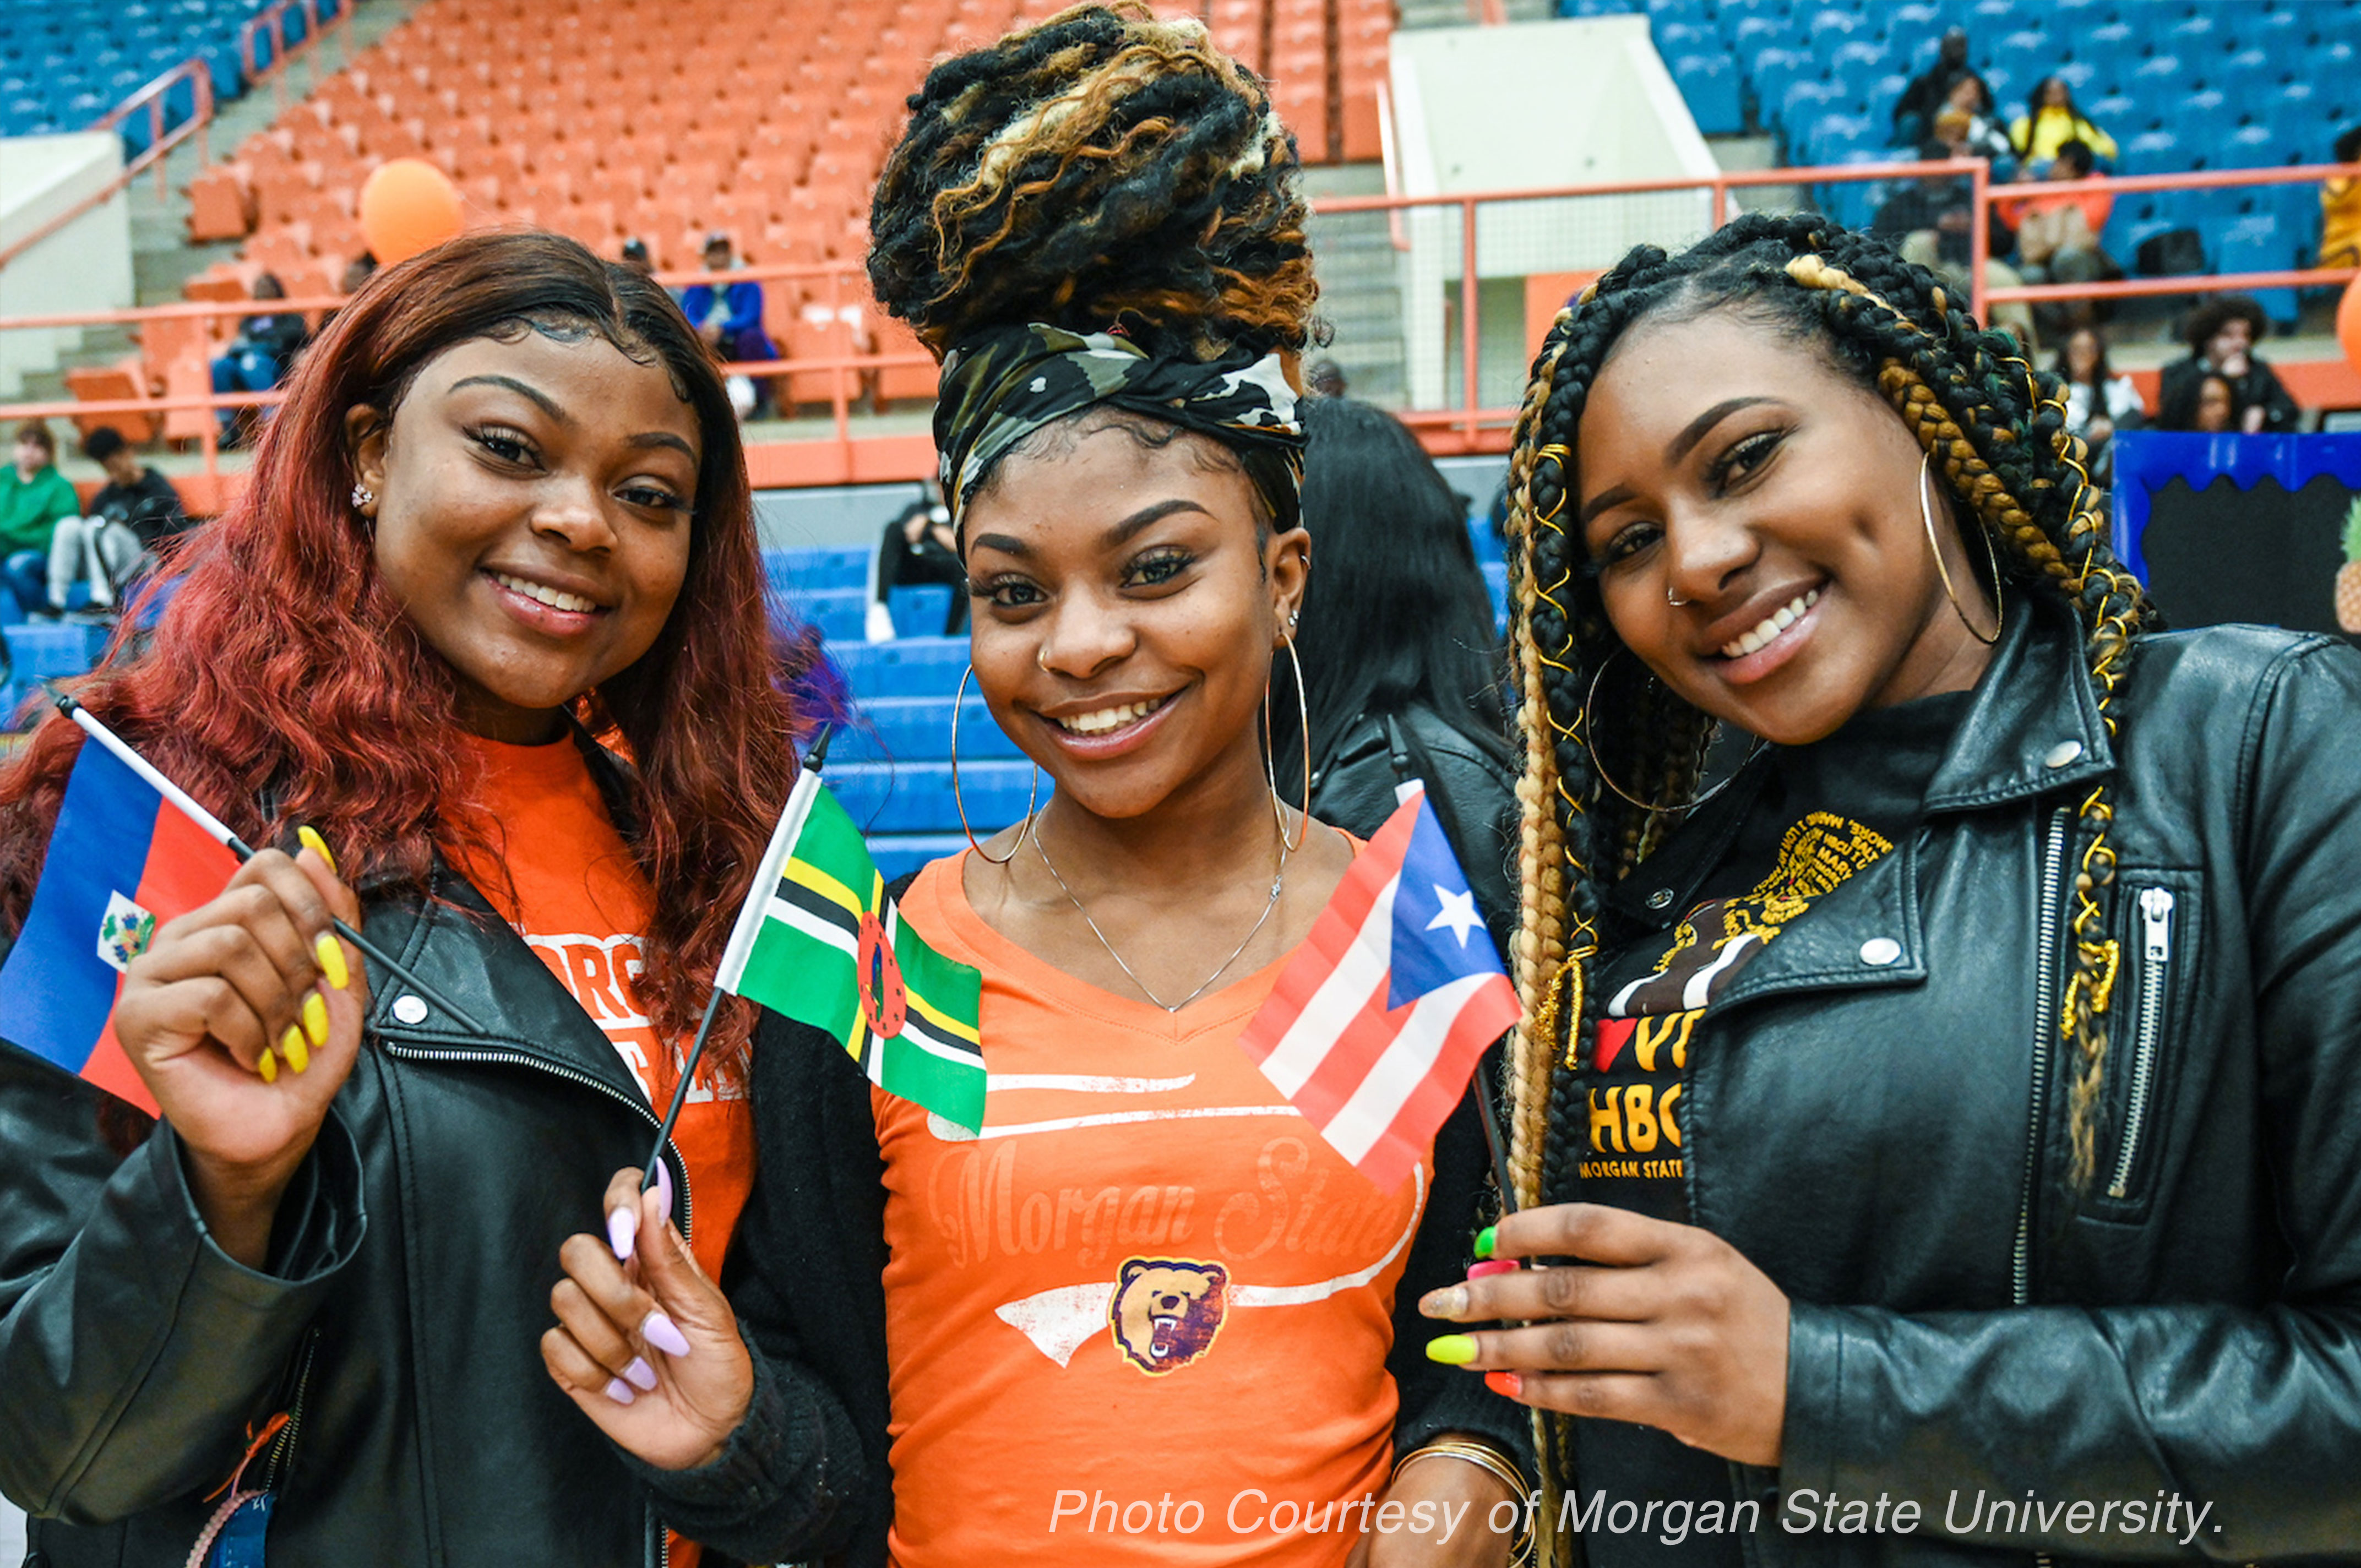 A group of students attend a sporting event at Morgan State University.